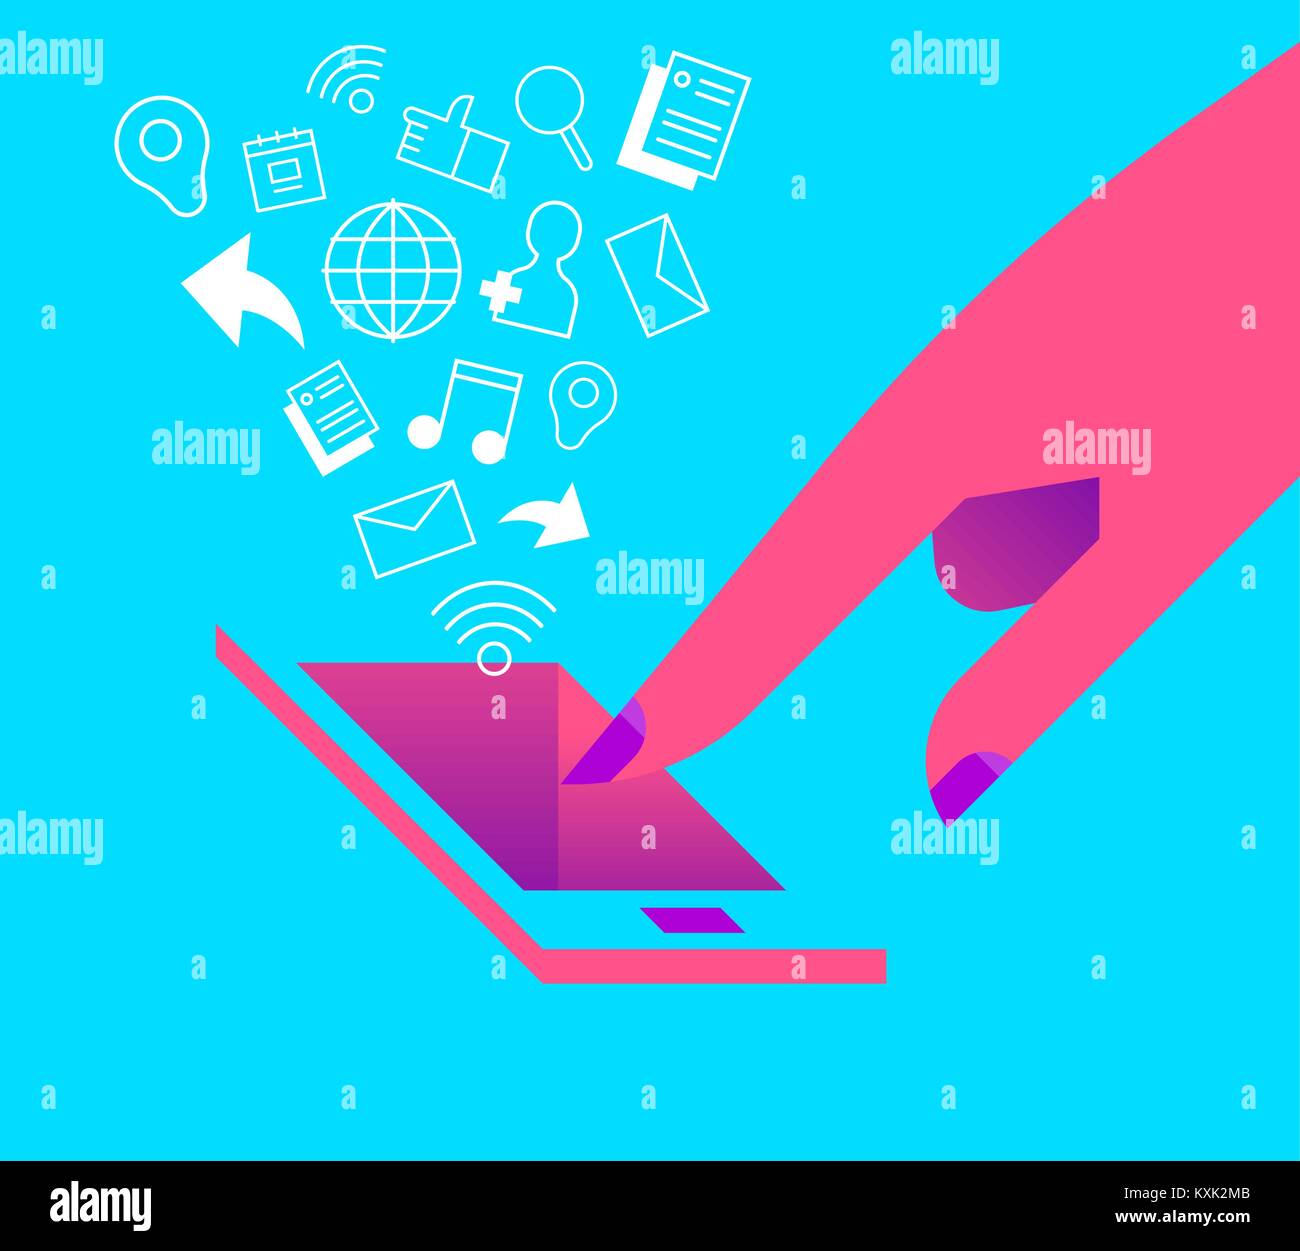 Girl hand using mobile phone device to connect on social media network and online internet activities. Includes music, message, photo, gps icon. EPS10 Stock Vector